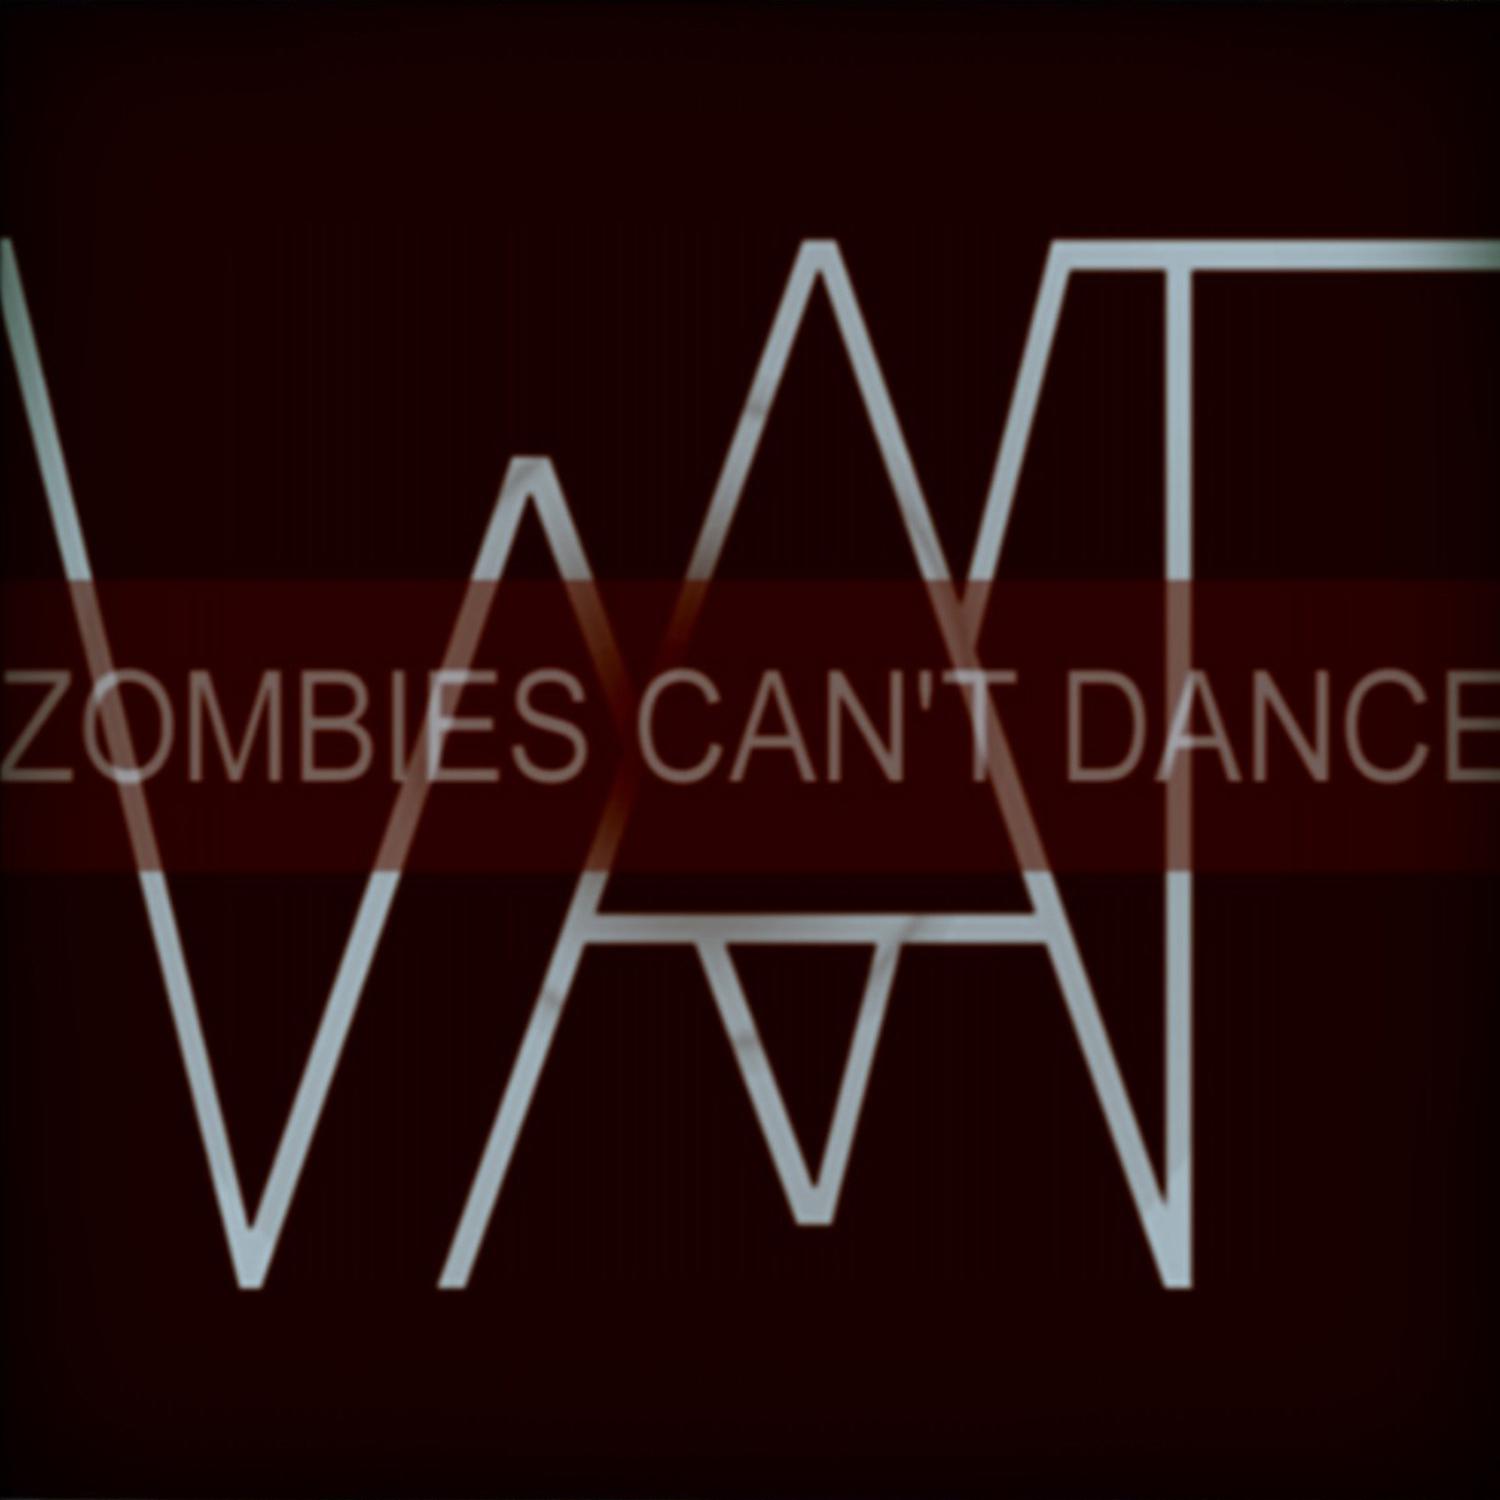 White Apple Tree - Zombies Can't Dance